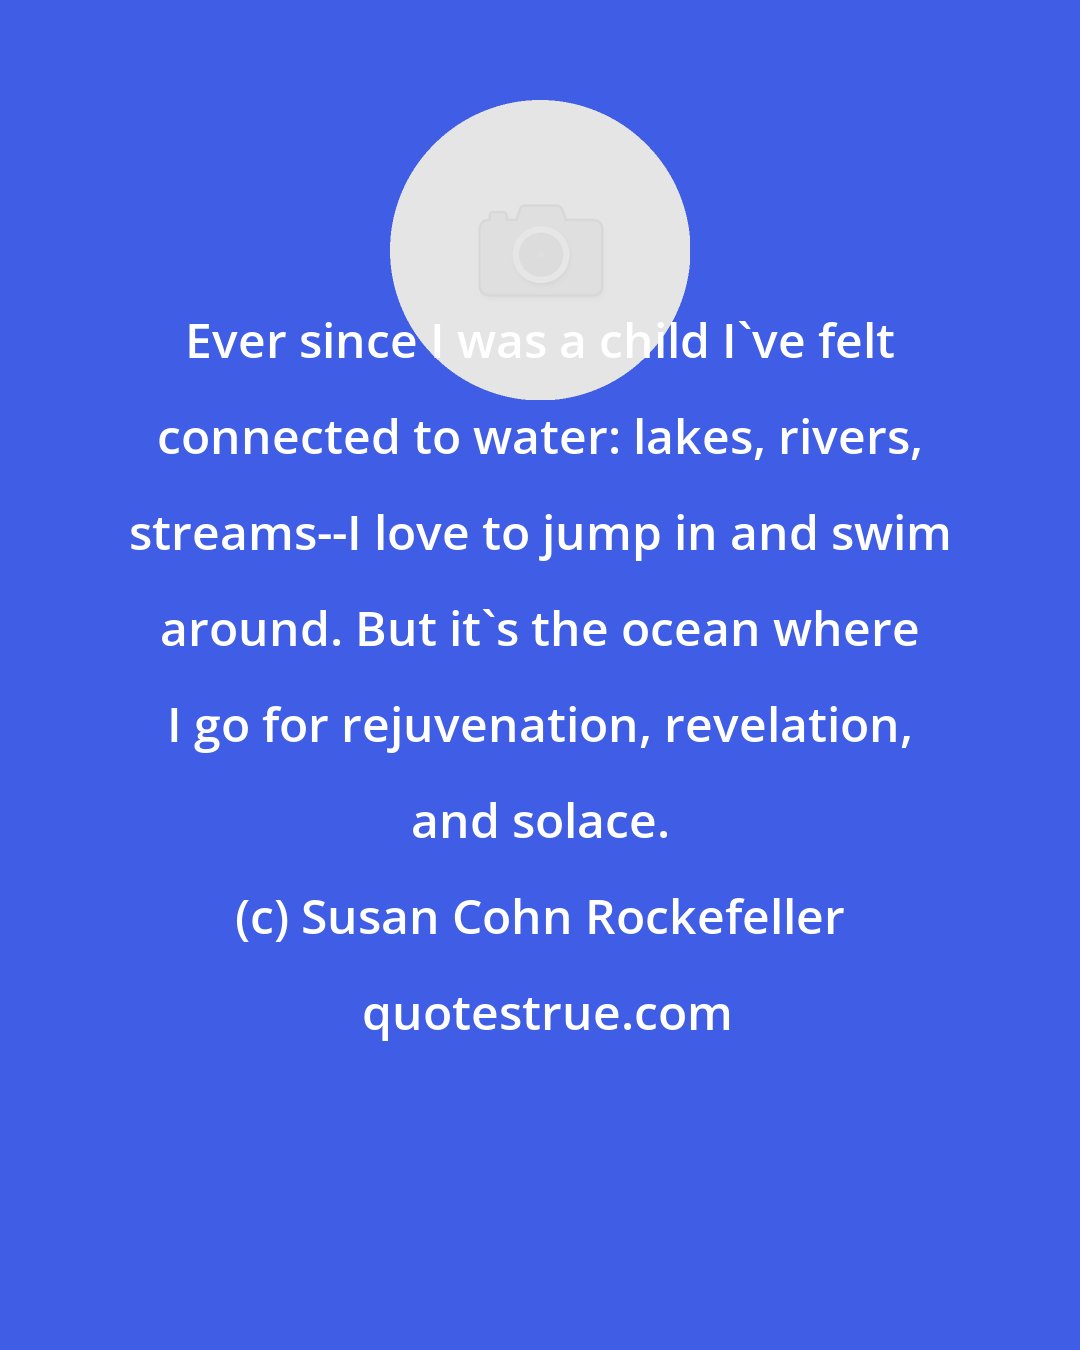 Susan Cohn Rockefeller: Ever since I was a child I've felt connected to water: lakes, rivers, streams--I love to jump in and swim around. But it's the ocean where I go for rejuvenation, revelation, and solace.